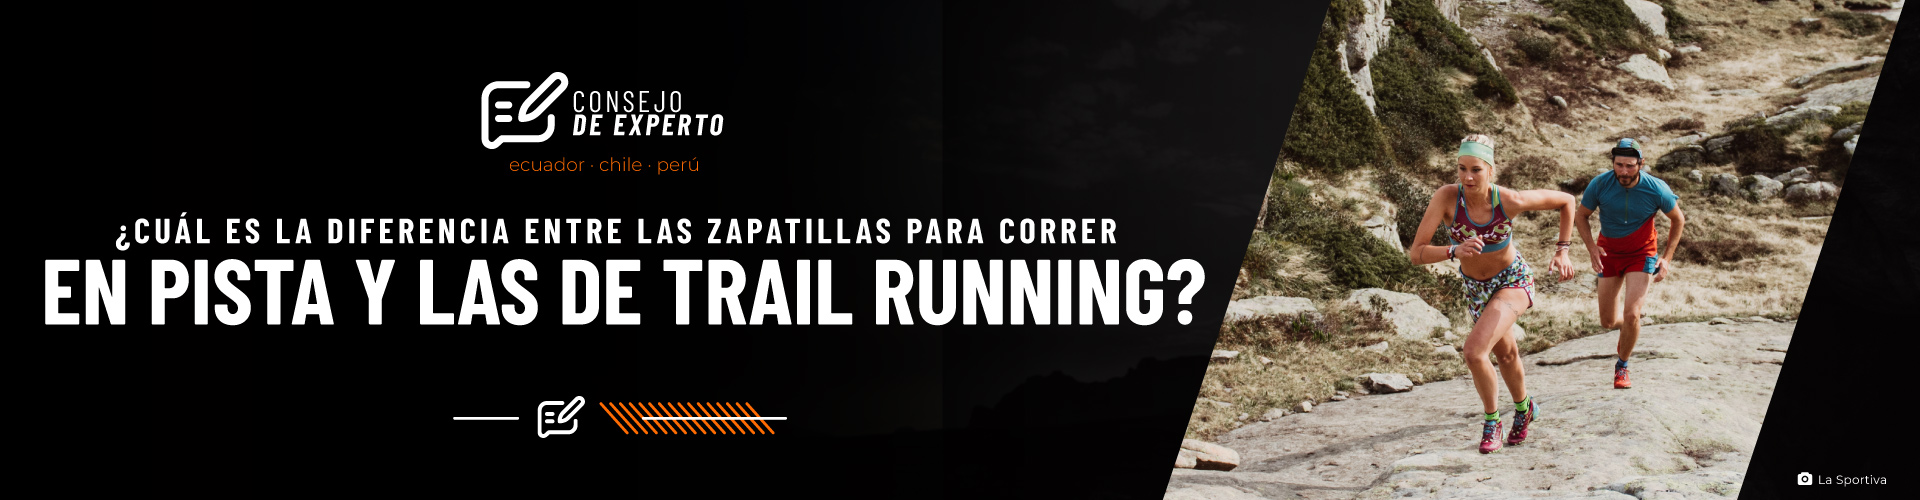 Ropa y equipo para trail running